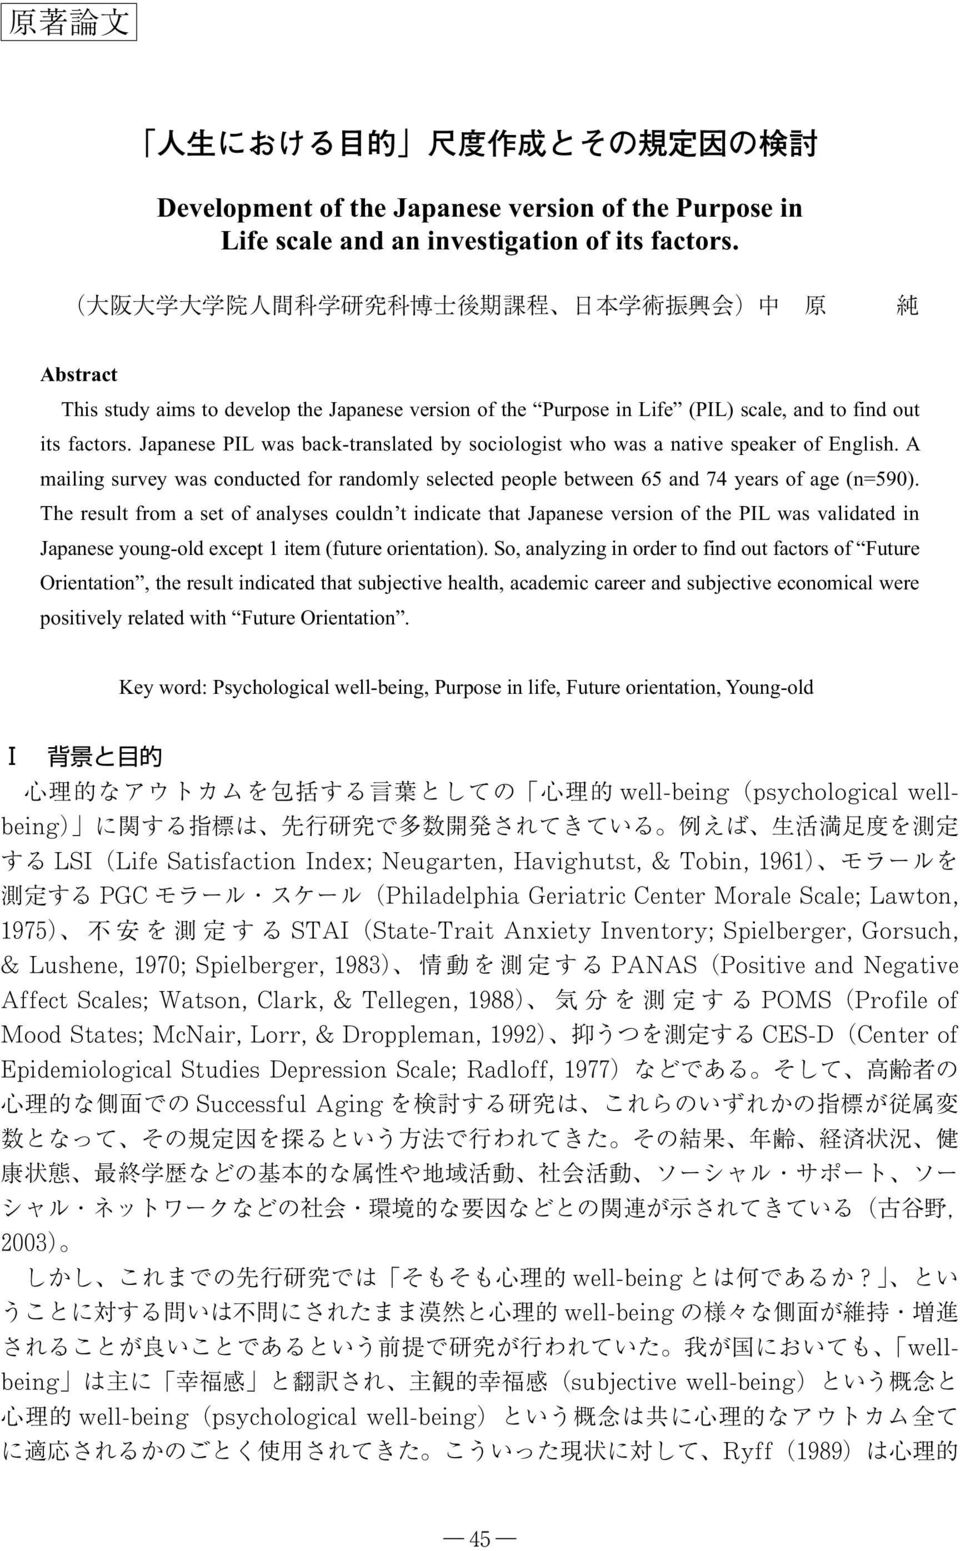 Japanese PIL was back-translated by sociologist who was a native speaker of English. A mailing survey was conducted for randomly selected people between 65 and 74 years of age (n=590).